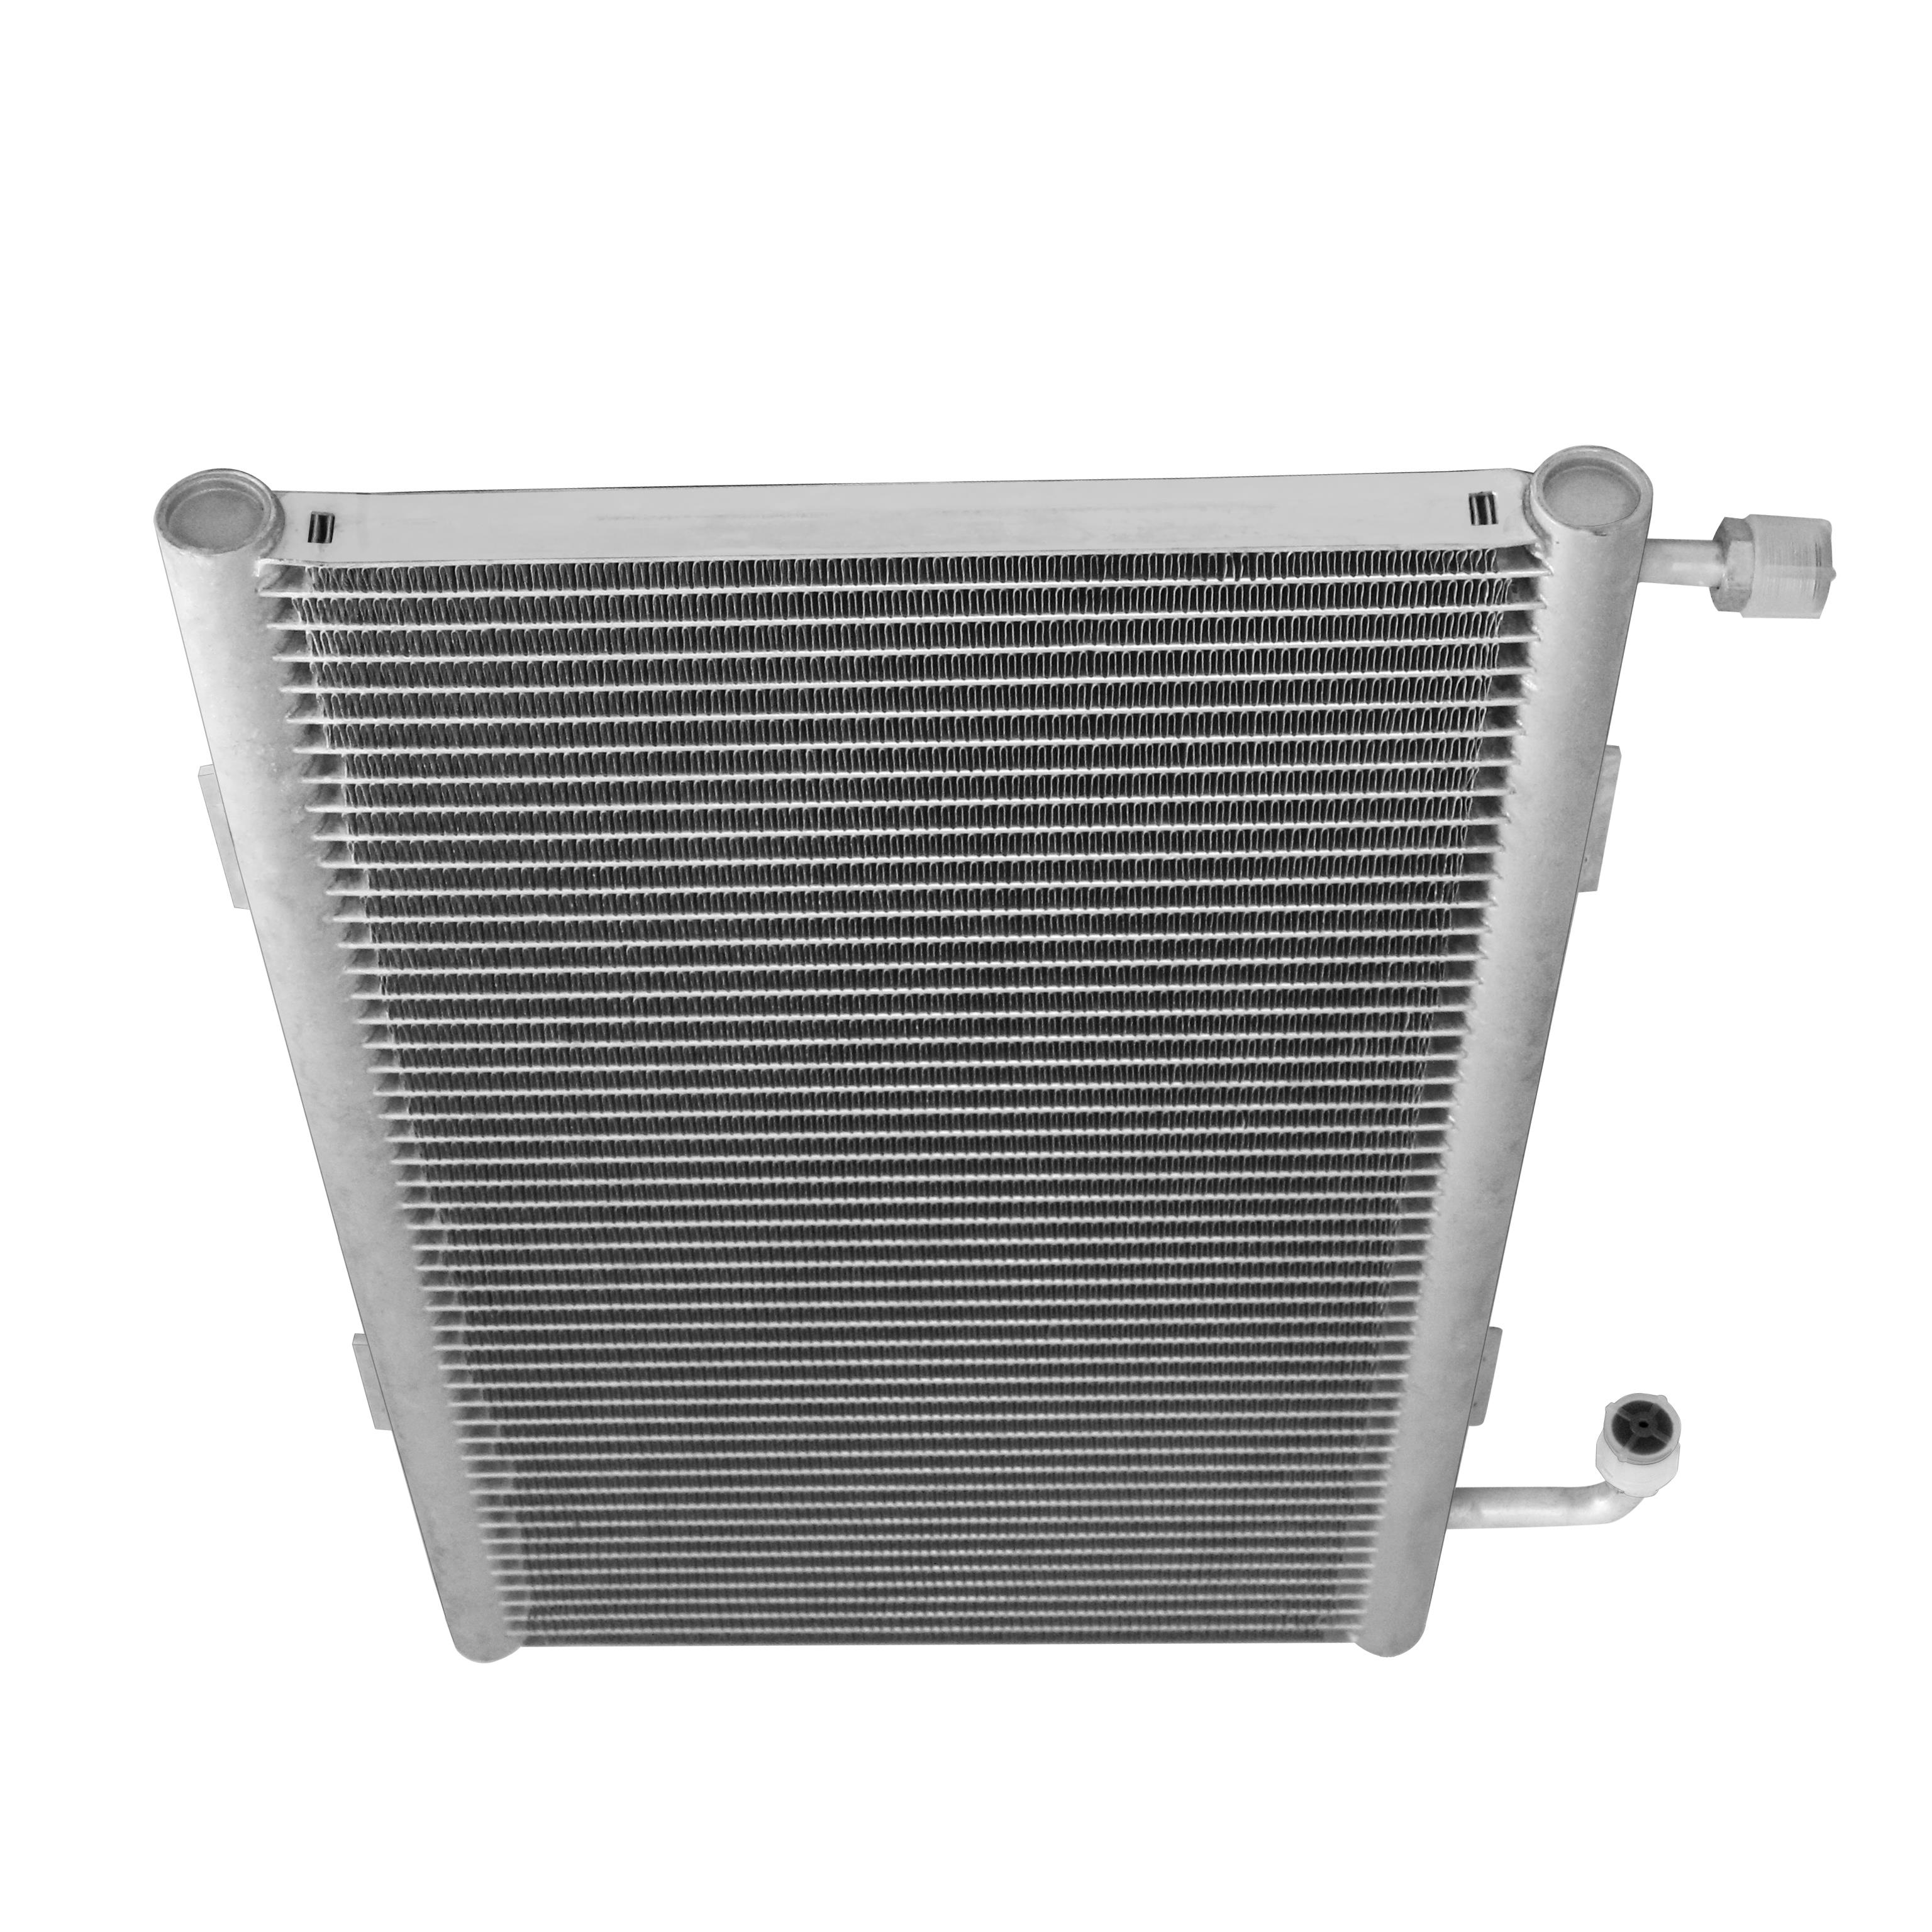 Aluminum  AC Condenser  12 Inch Wide X 19 Inch Tall  5/8-16 Inlet  3/4-16 Outlet  22mm Thick  Use With 134 Or R12 Freon  